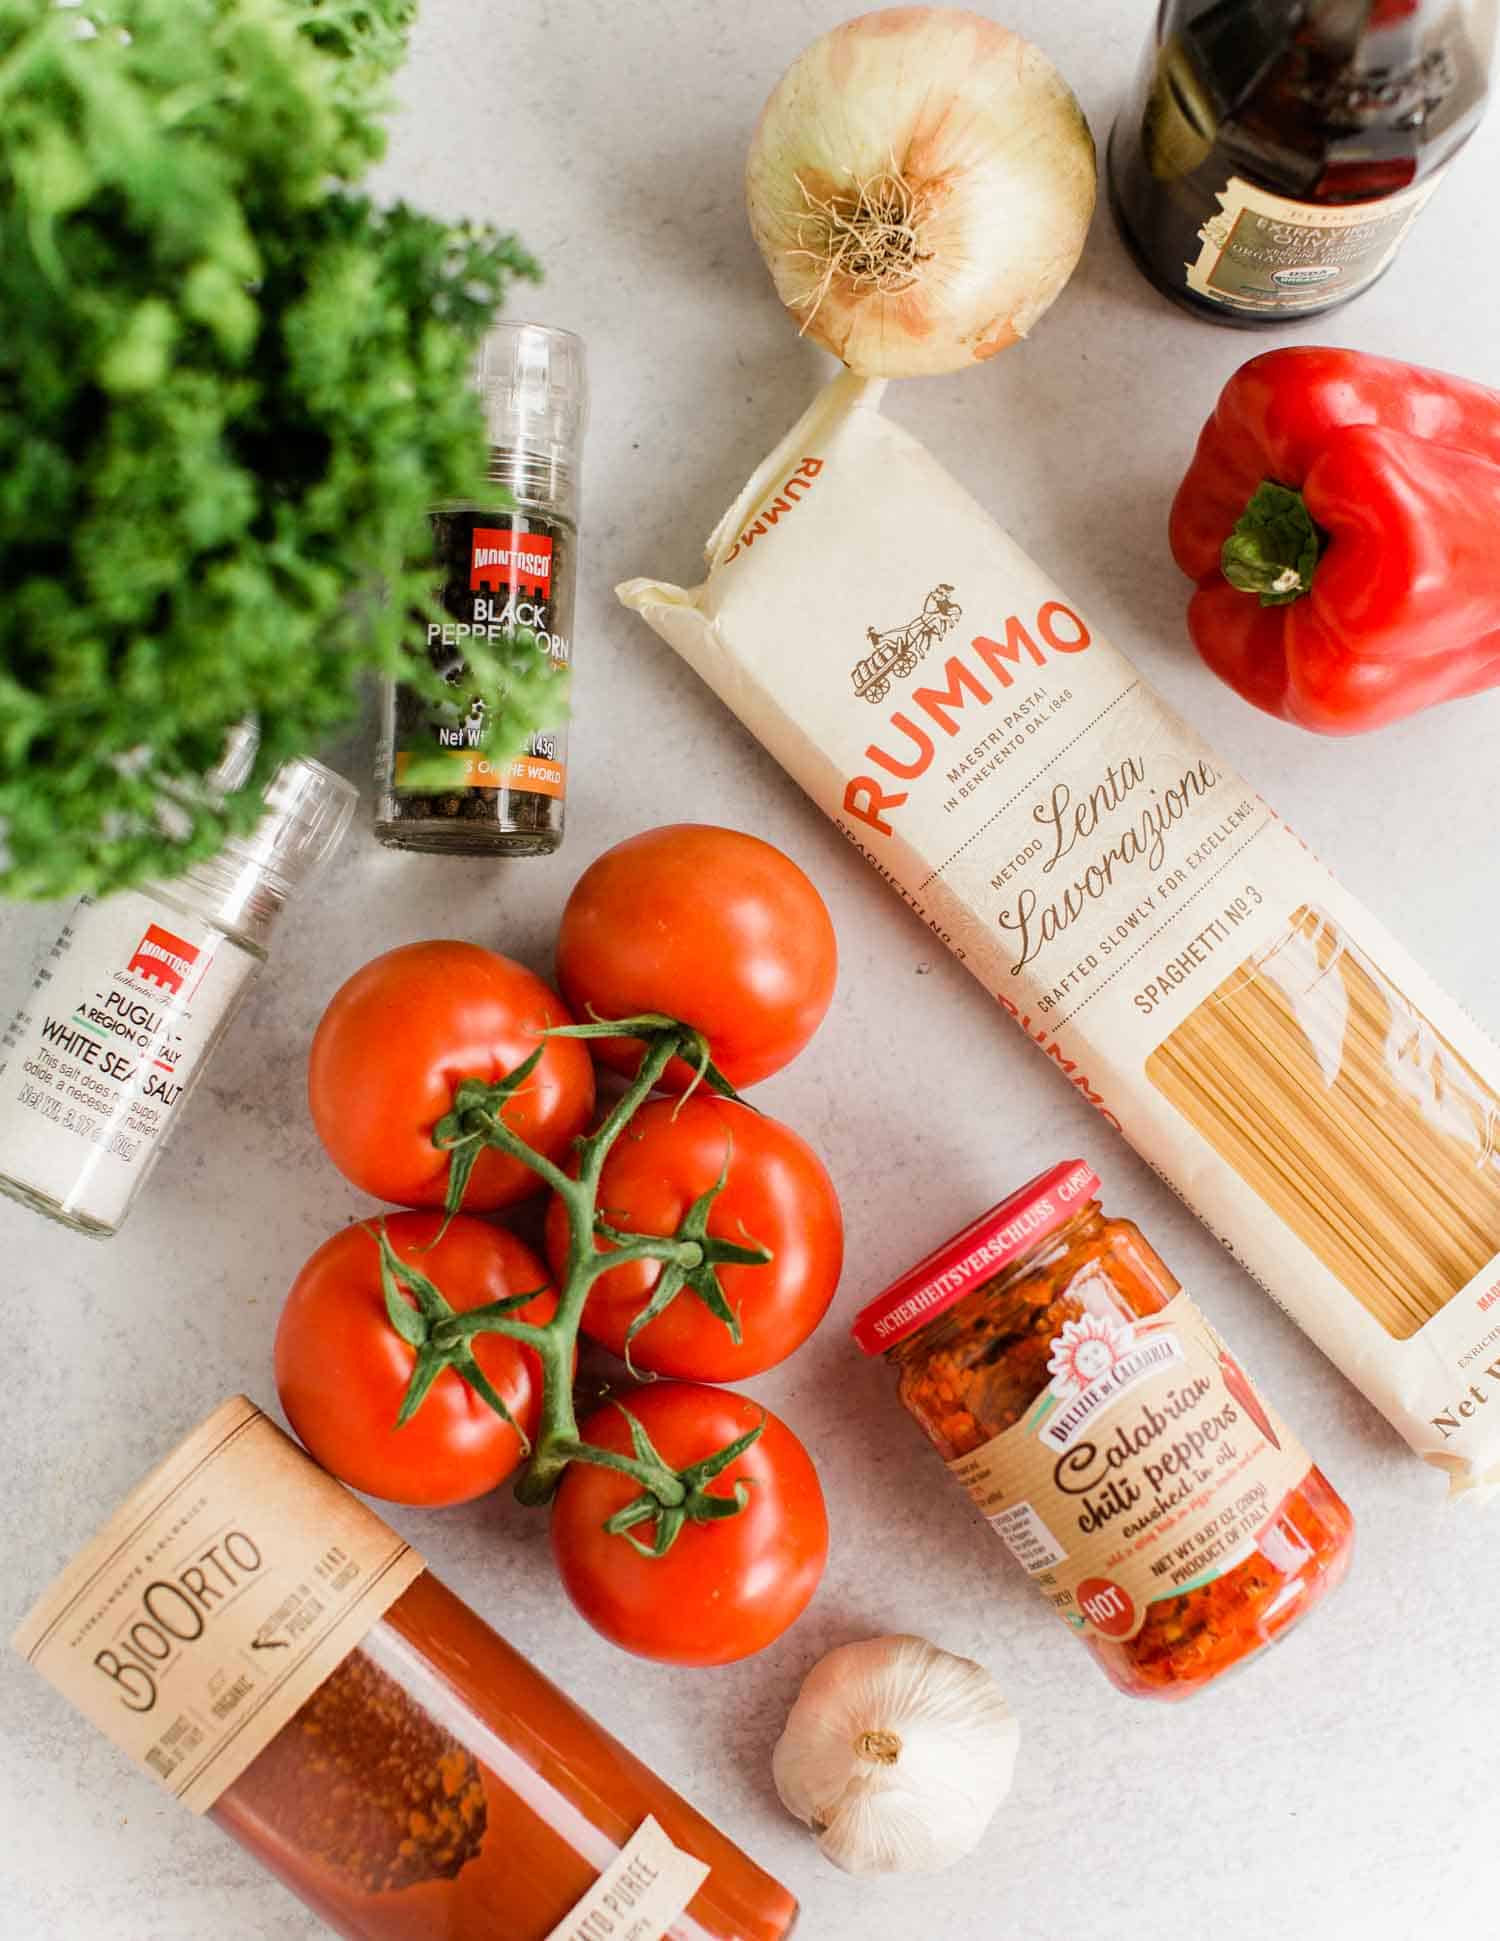 Spaghetti Arrabbiata Ingredient Flatlay with tomatoes chili peppers tomato puree pasta bell pepper garlic onion and olive oil